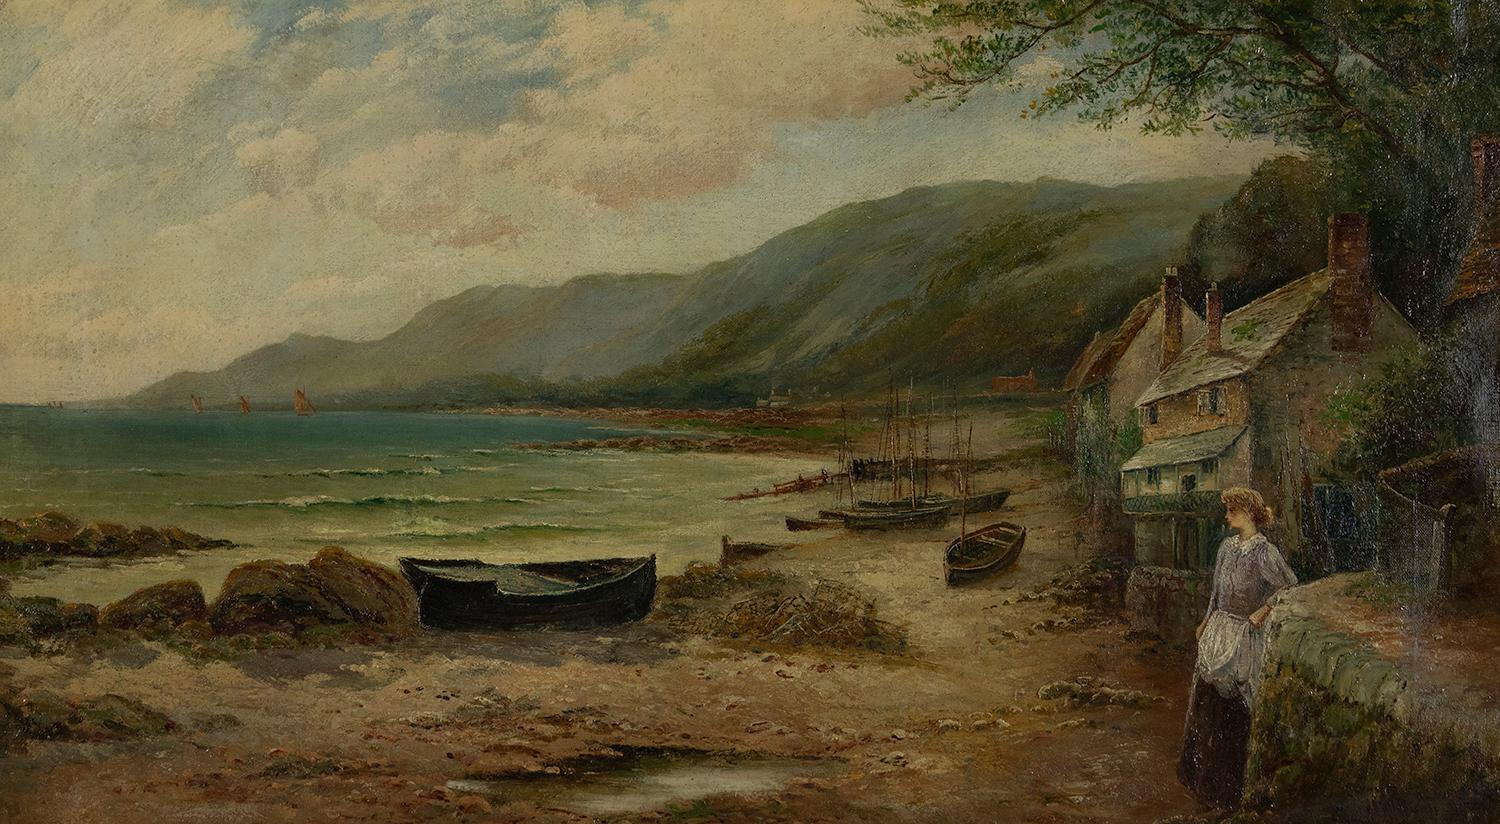 Ernest Walbourn Figurative Painting - Waiting for the Boats by ERNEST WALBOURN, RBA - 19th century landscape painting